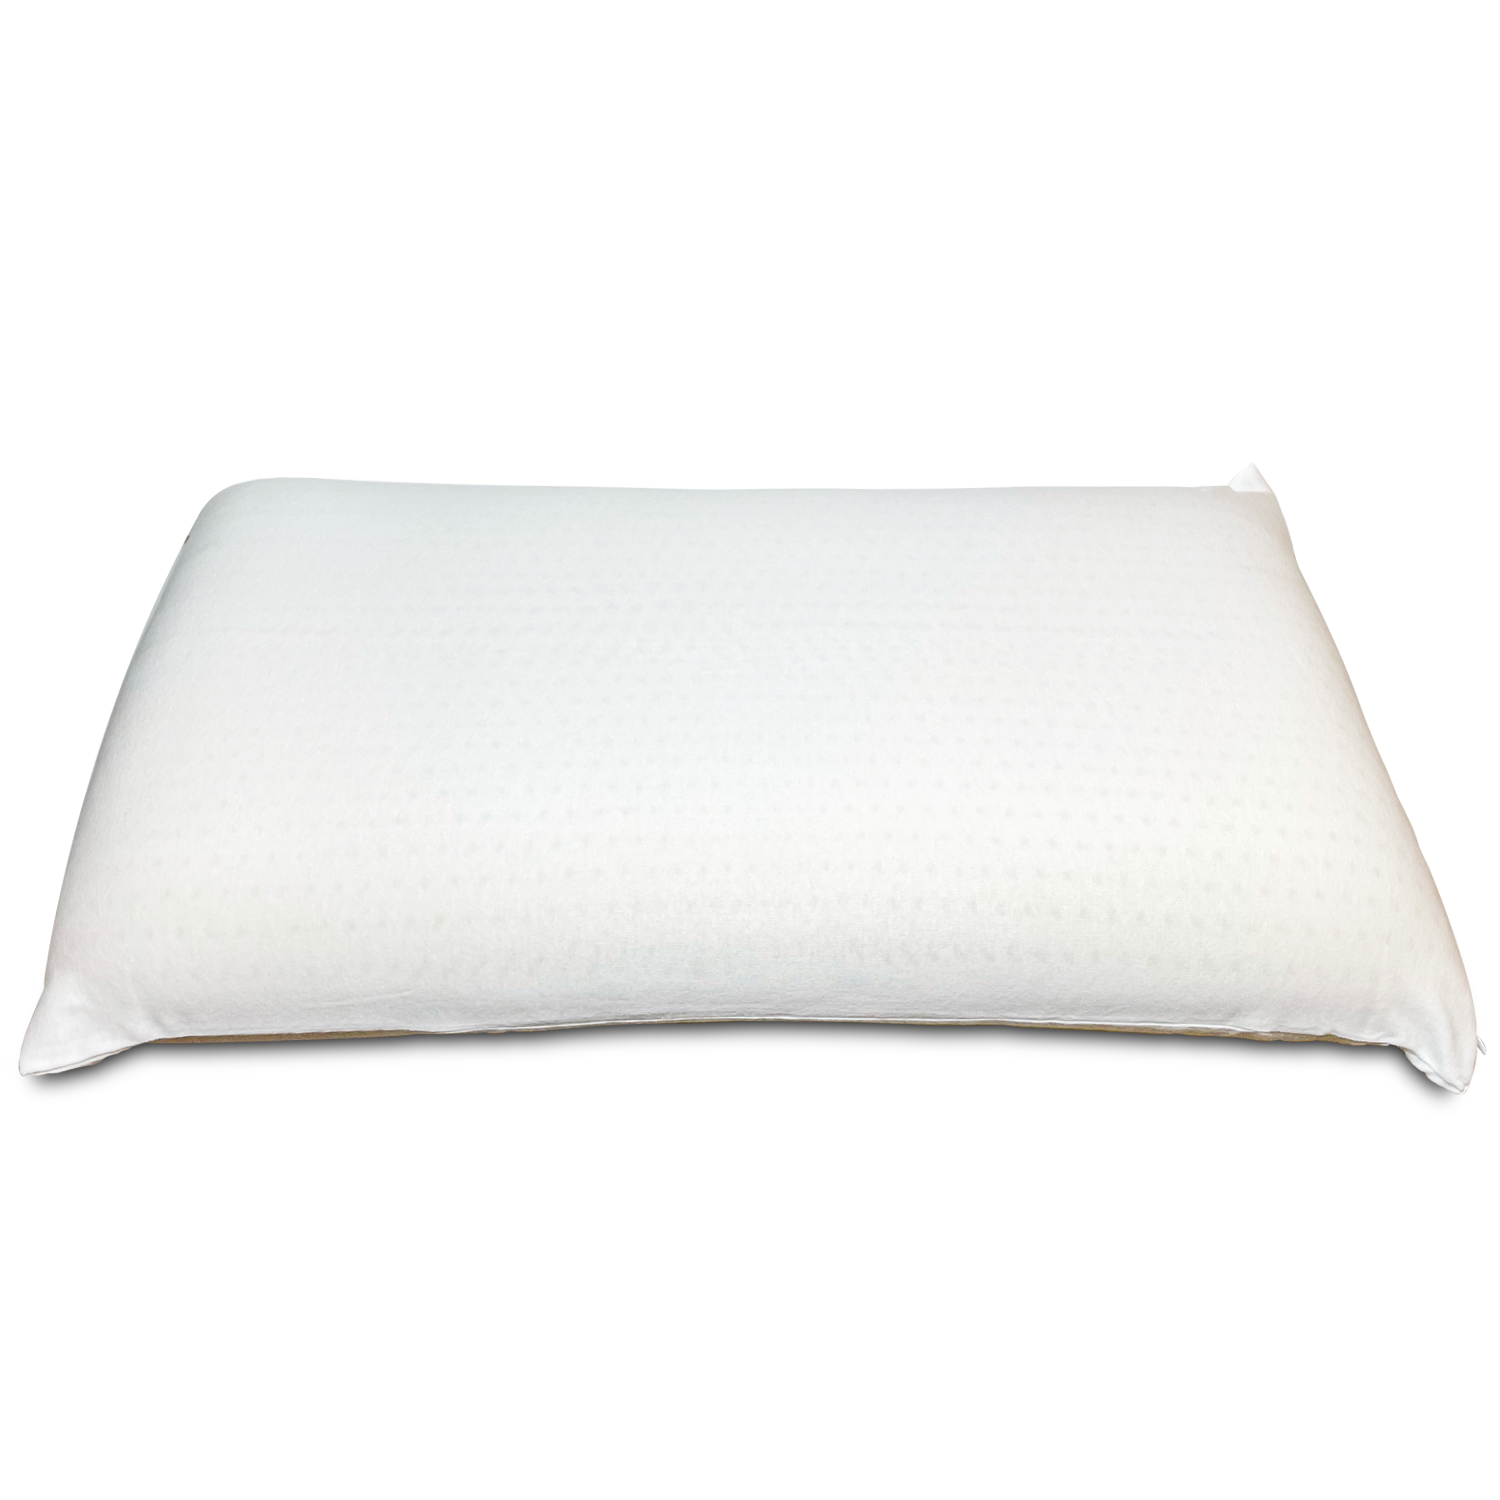 DS 100% Natural Talalay Pillow with Zippered Organic Cotton Cover - Organic Textiles